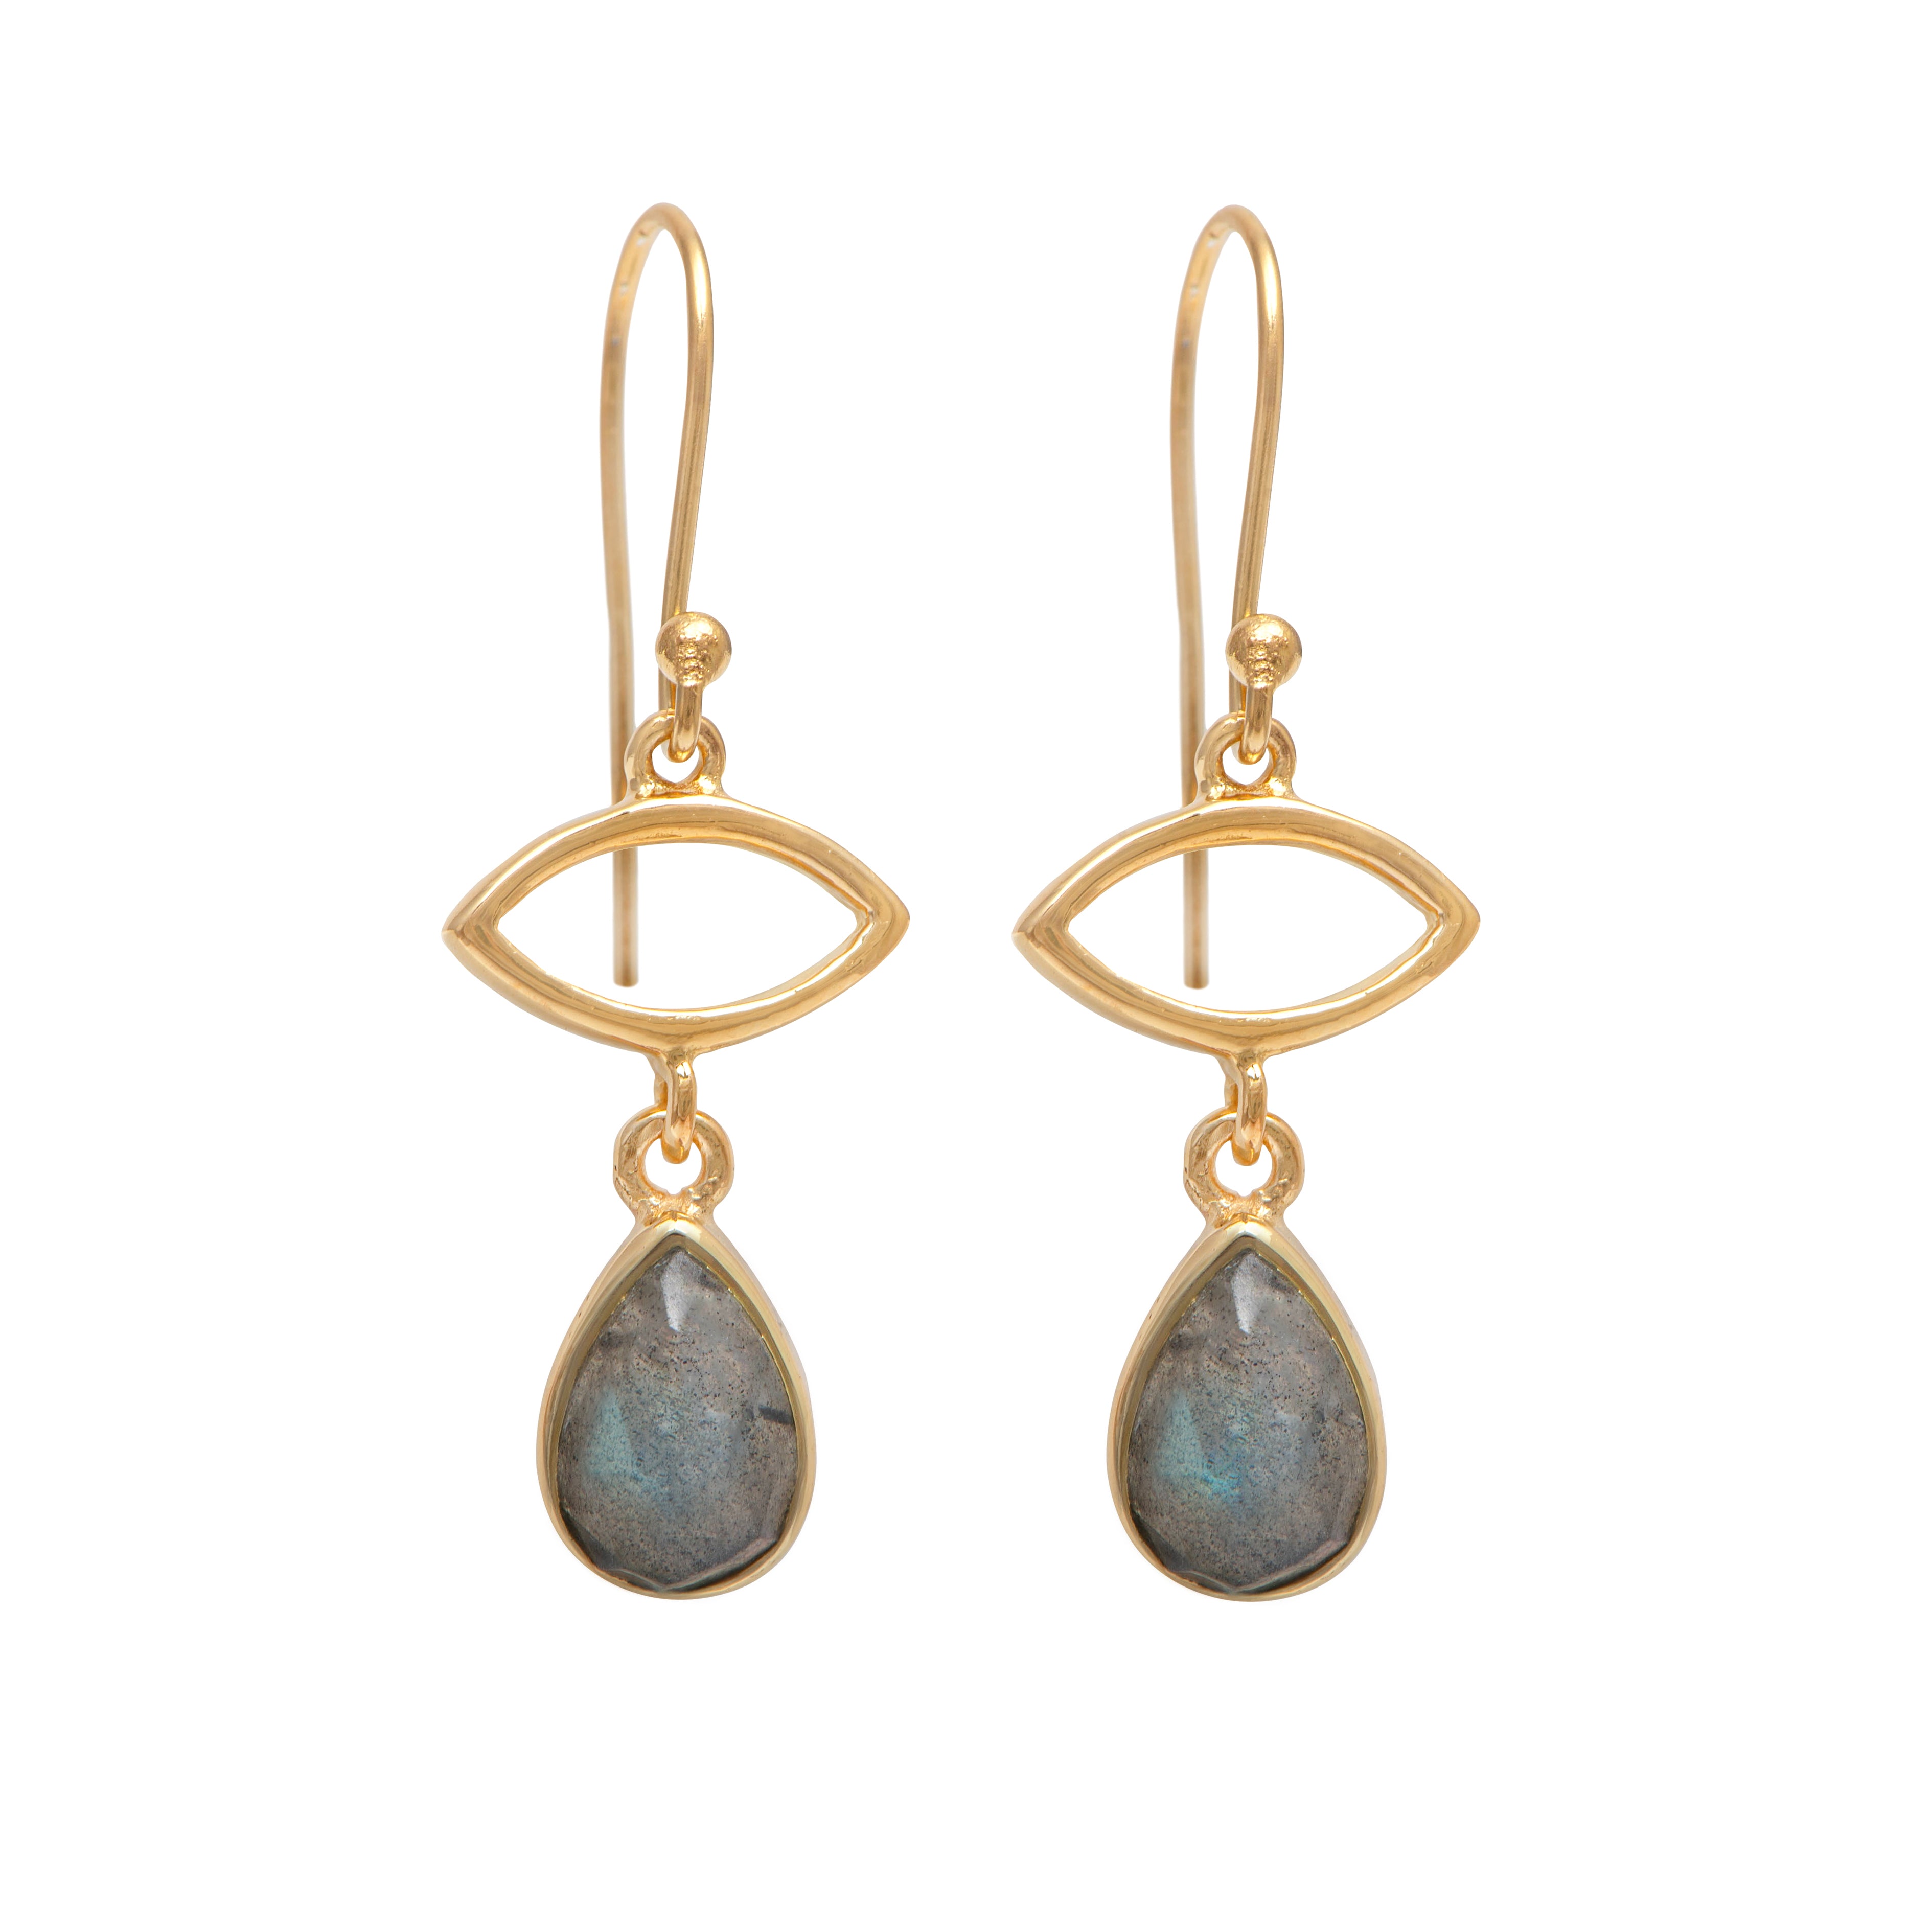 Gold Plated Drop Earrings with Labradorite Gemstone